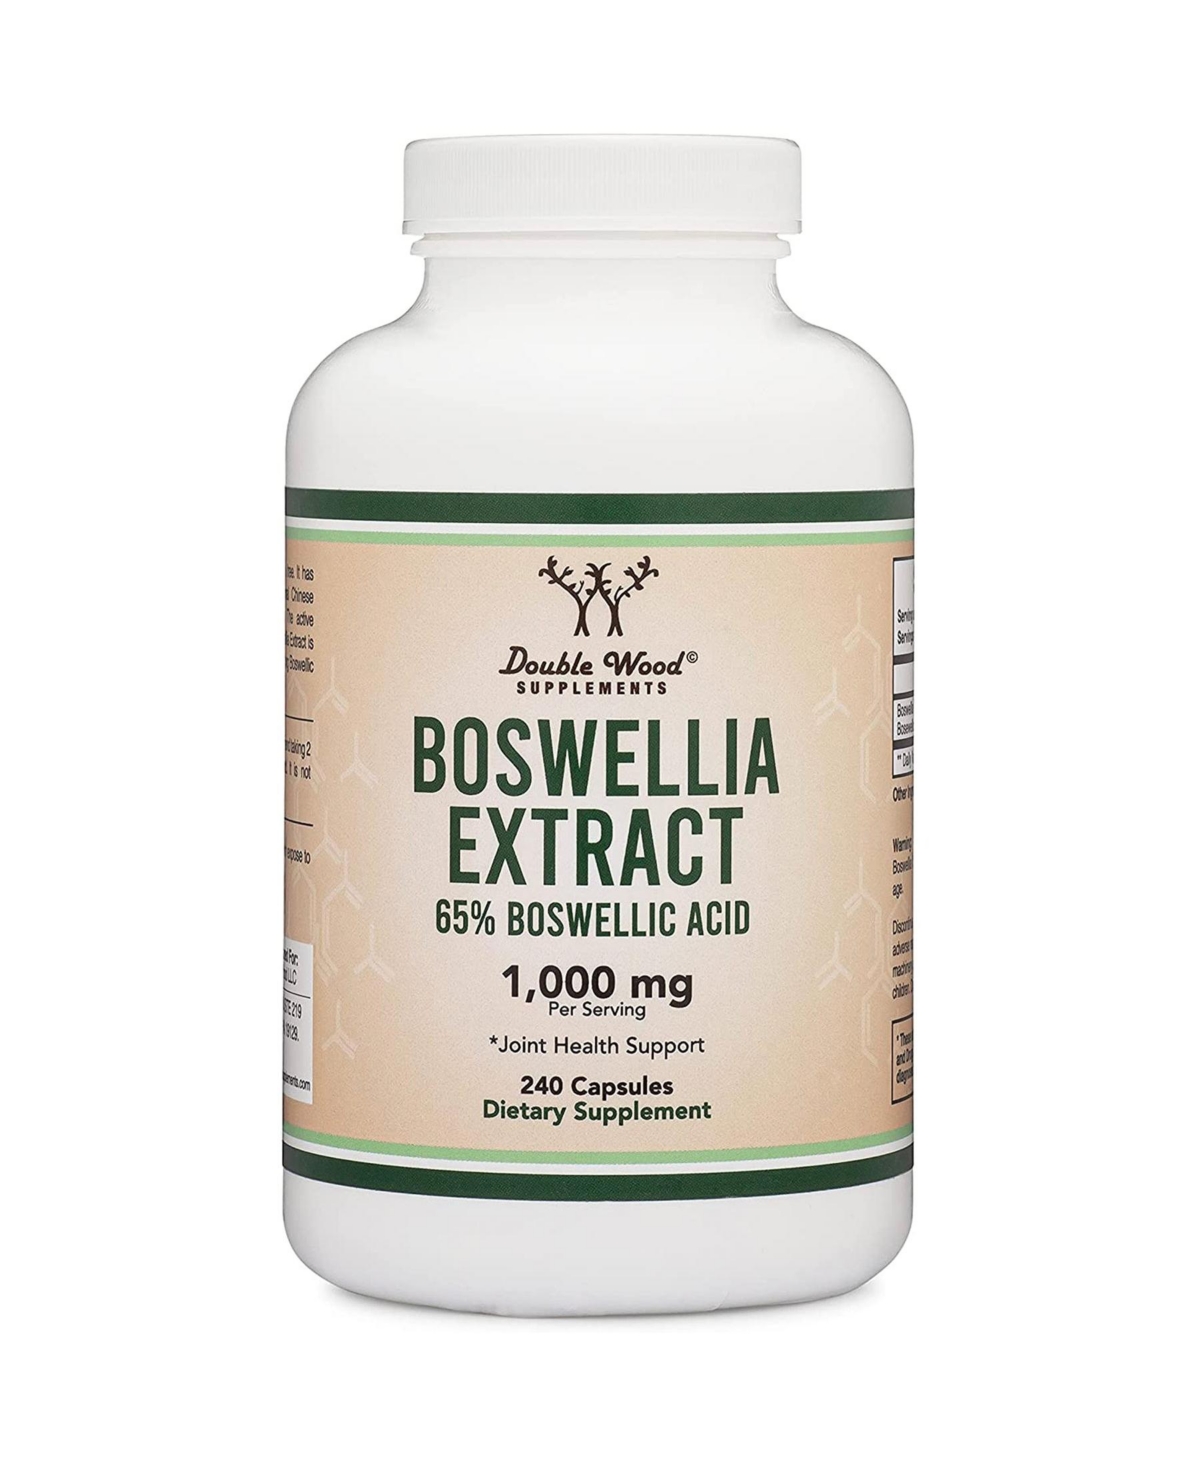 Boswellia Extract - 240 capsules, 1000 mg servings